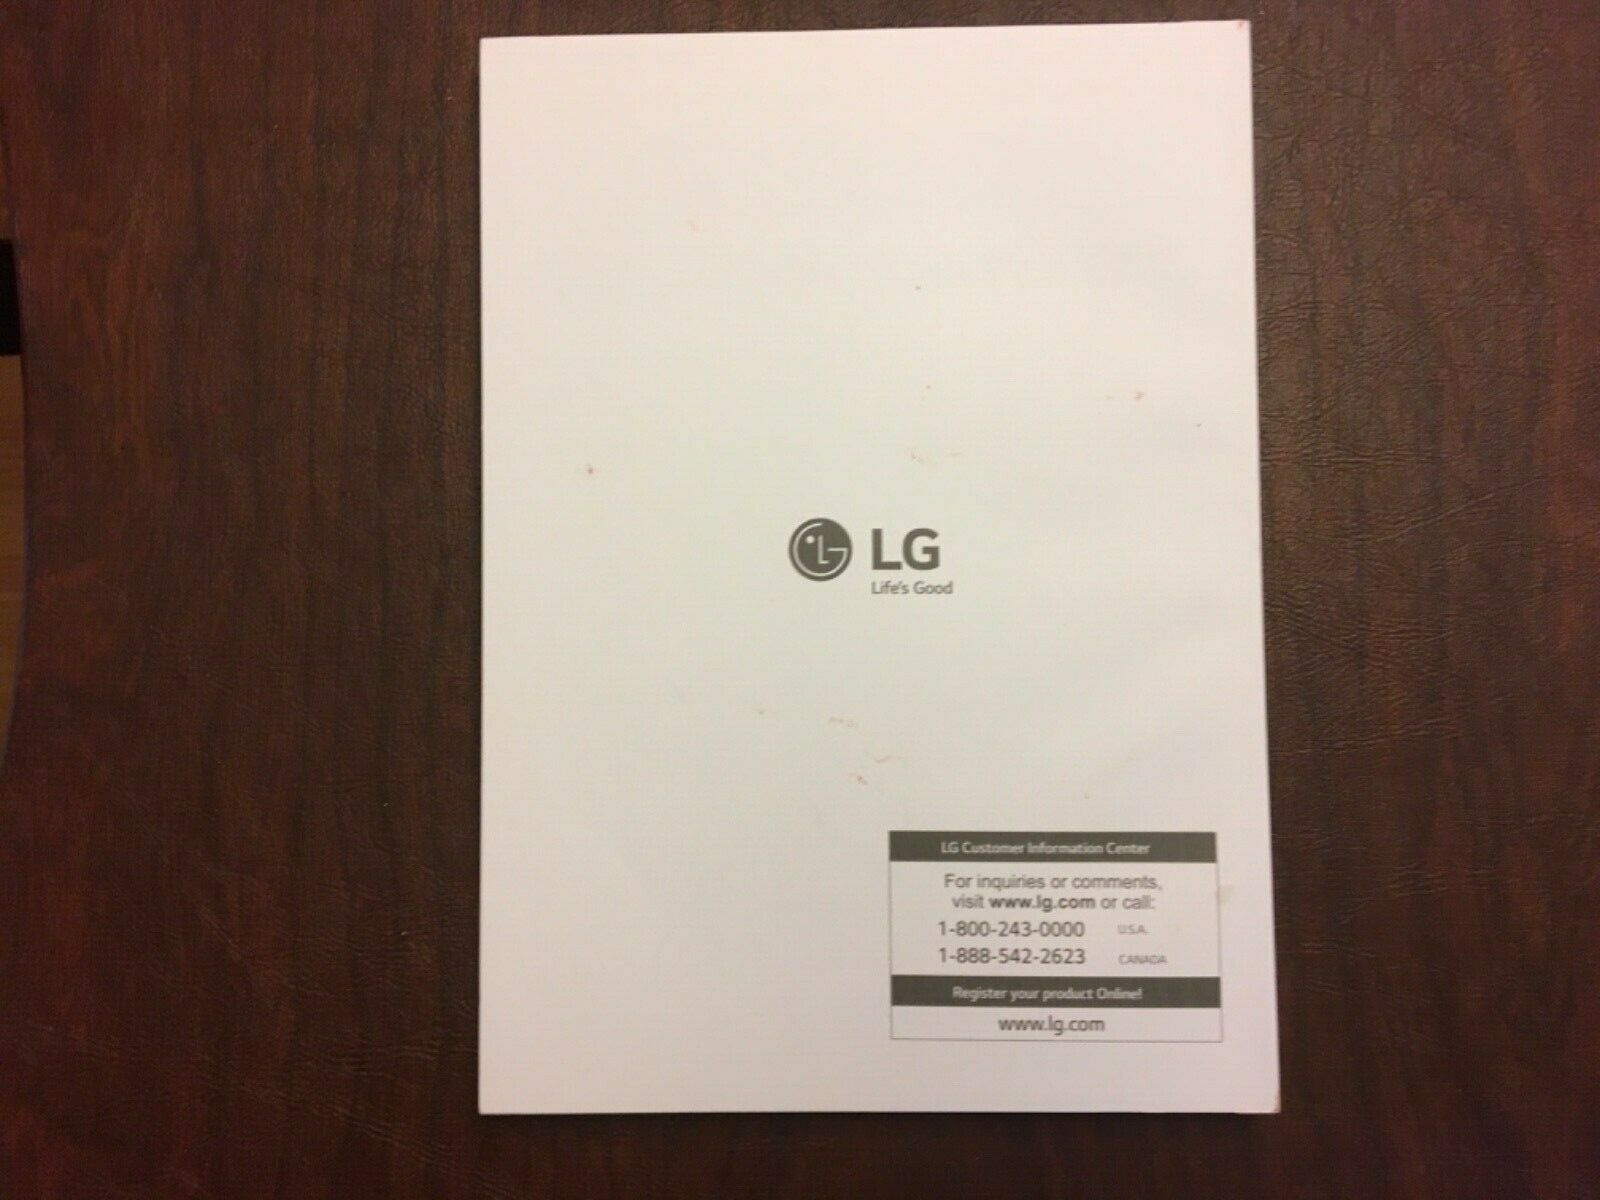 Lg Refrigerator Owners Manual LFXS26973 and 50 similar items